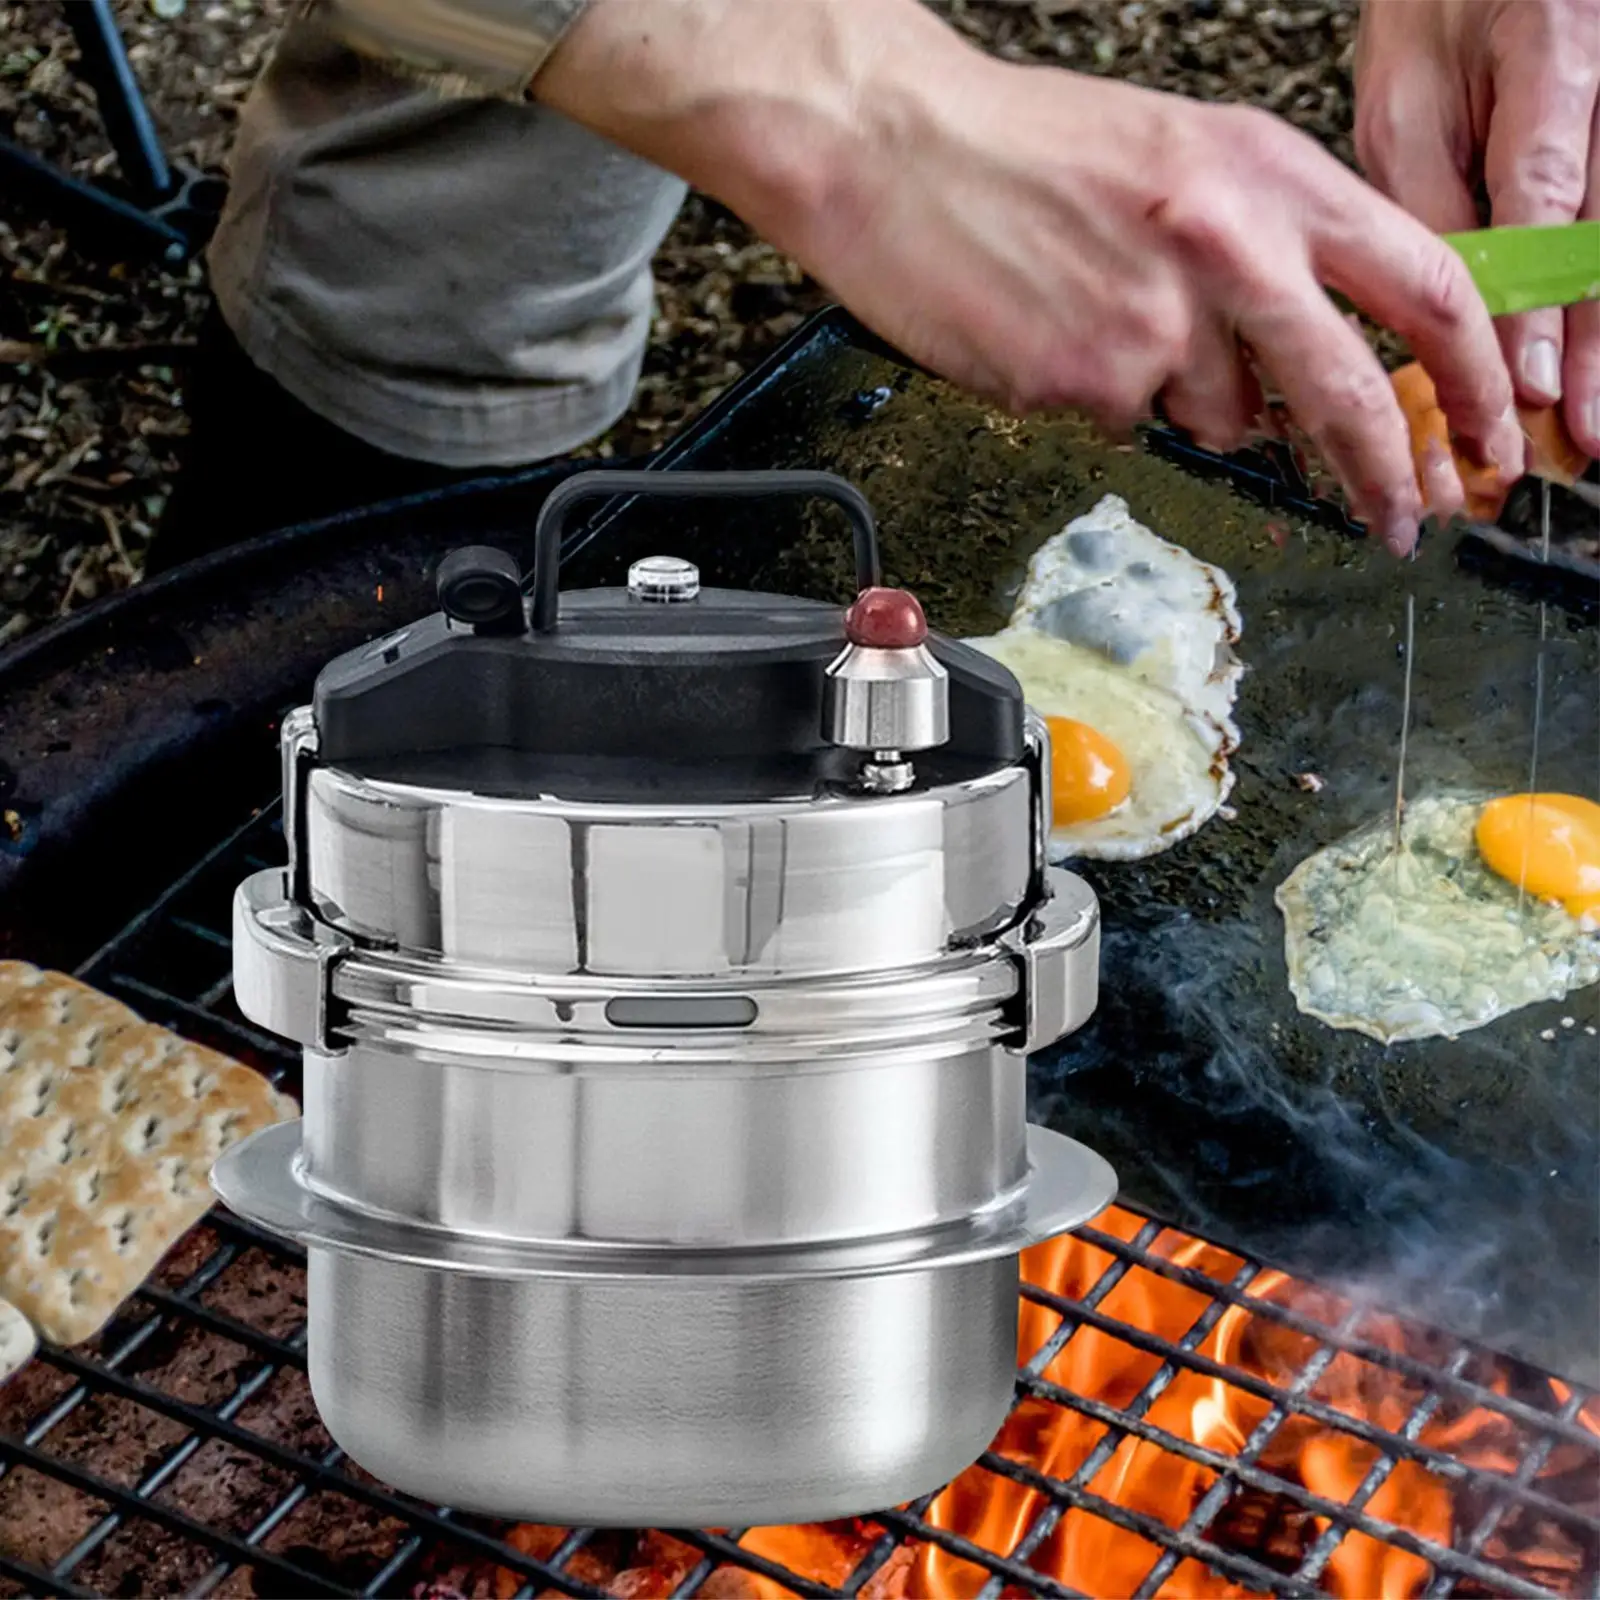 Pressure Cooker Multifunction Nonstick Stainless Steel 2 Liters Portable Cooking Pot for Home Family Stove Professional